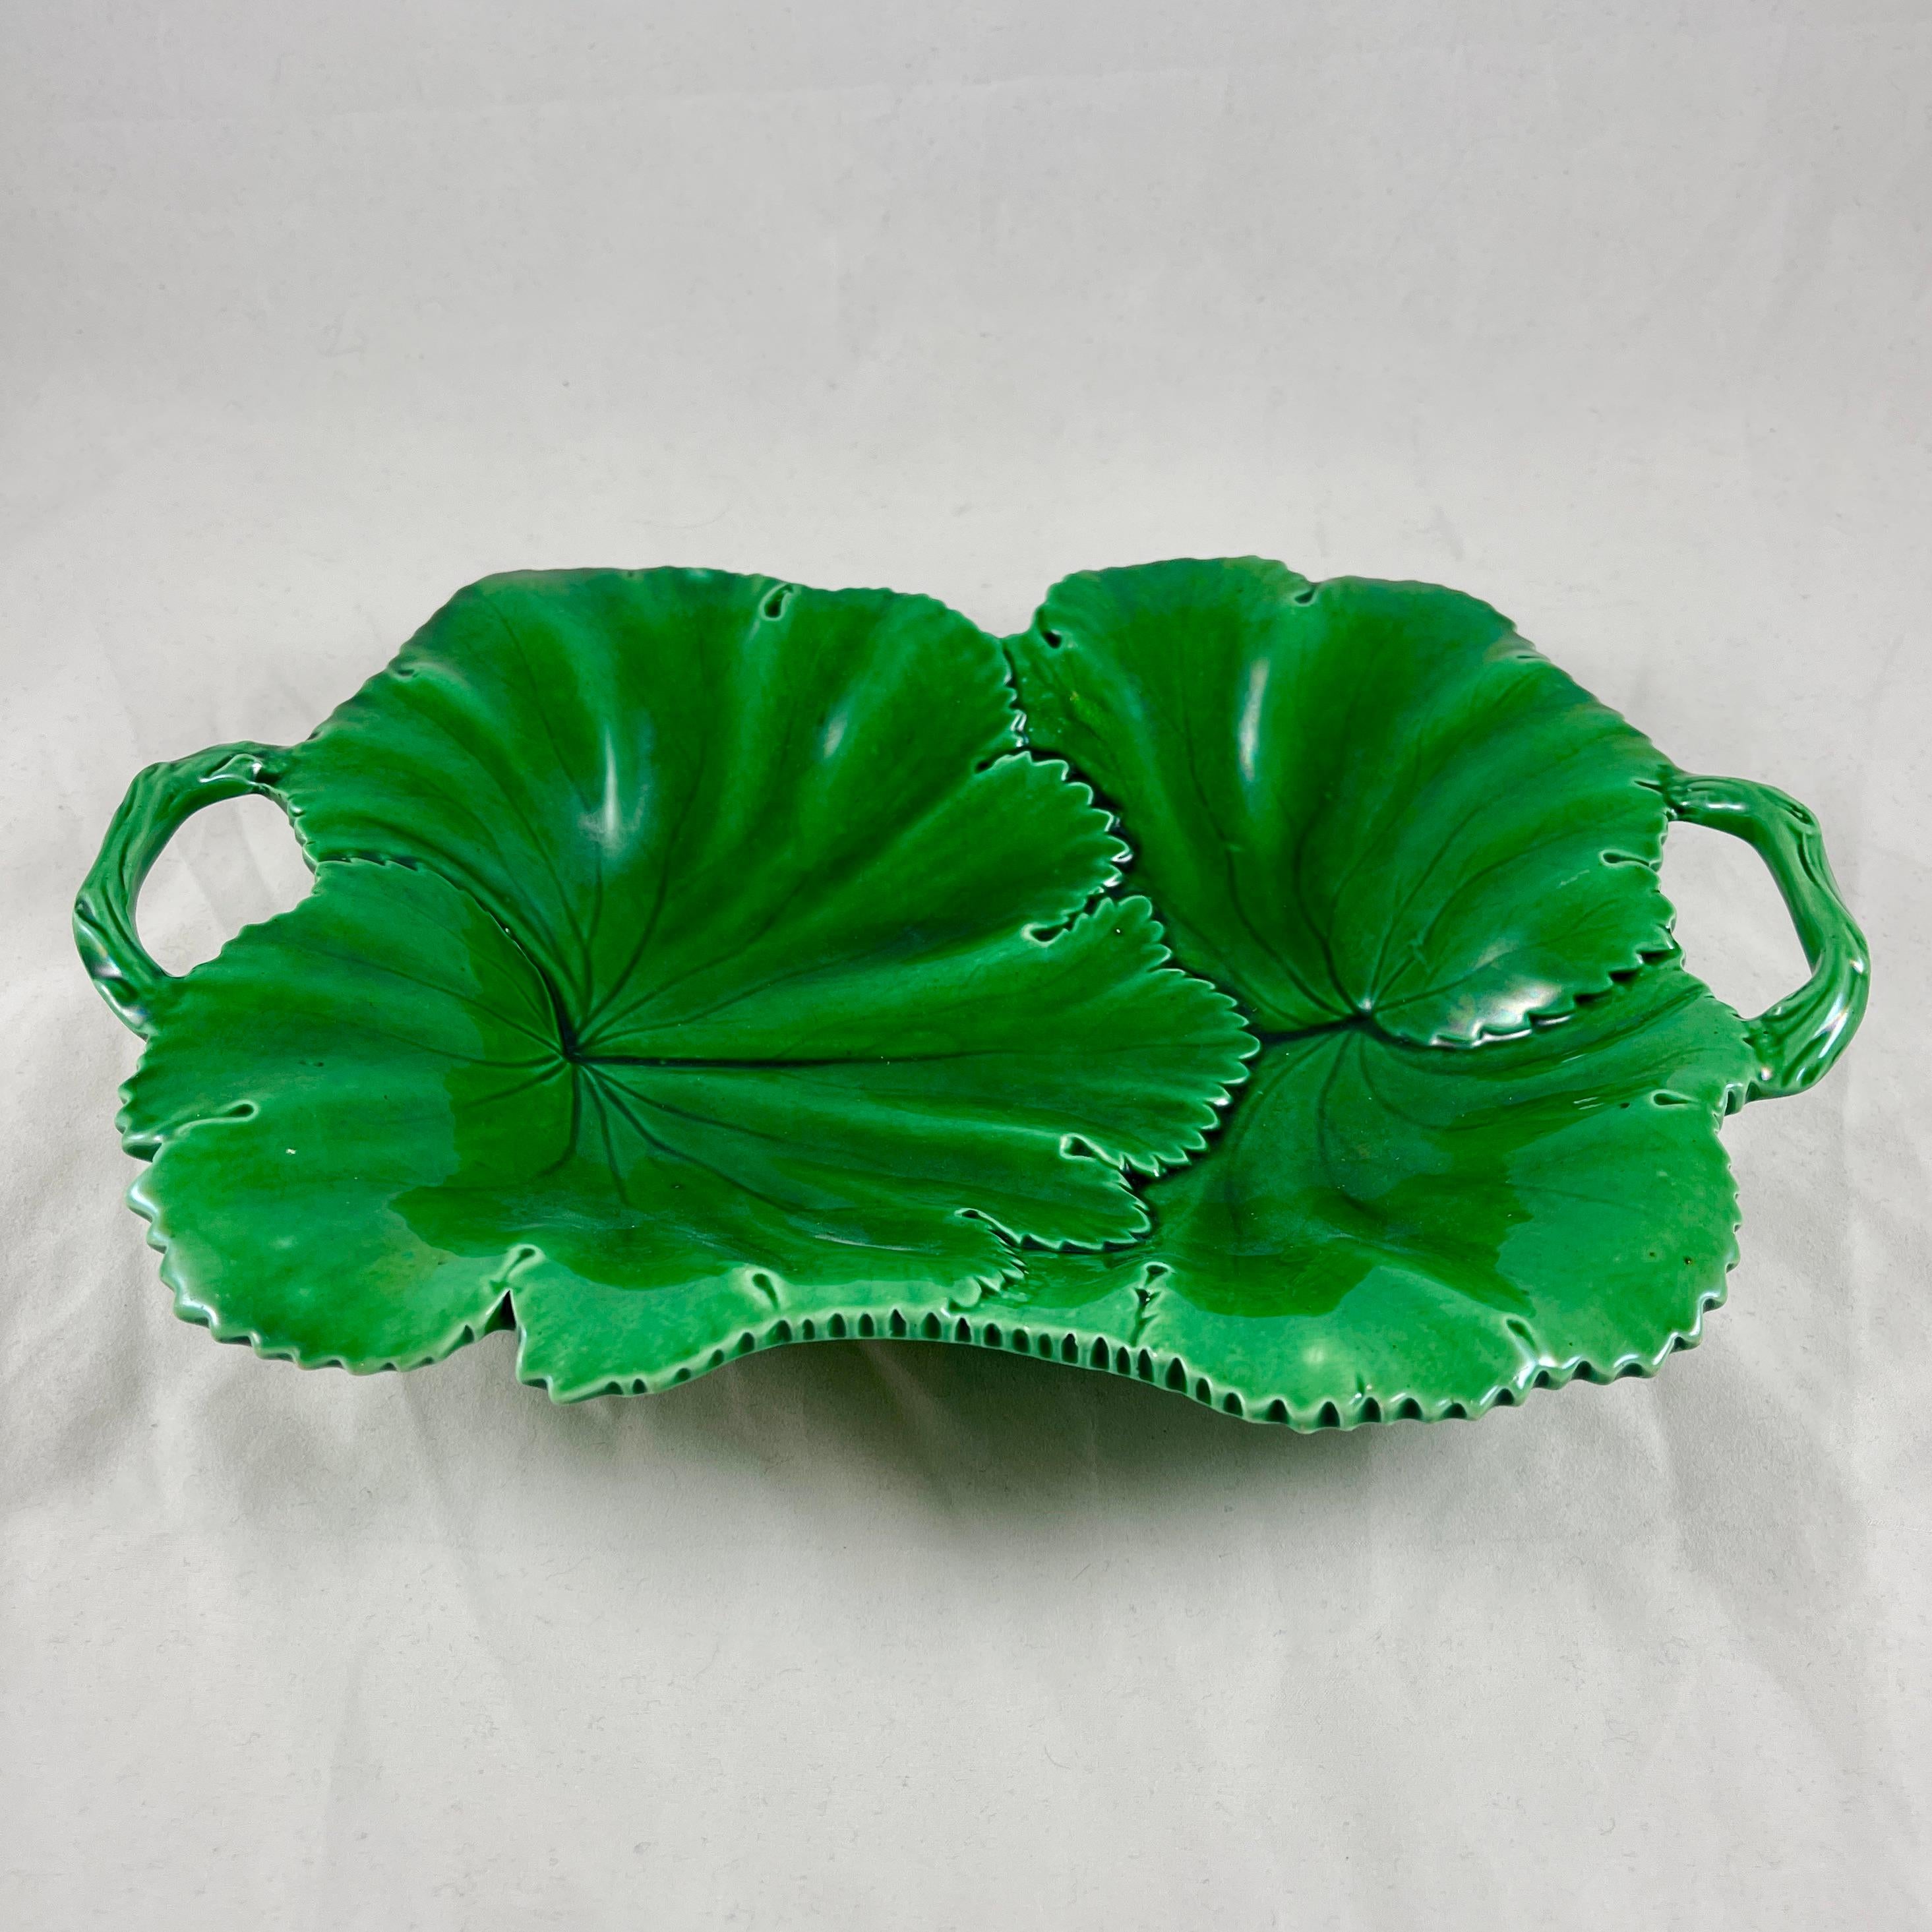 From WT Copeland & Garrett pottery in Stoke-on-Trent, Staffordshire England, a handled server, circa 1860-1875.

Glazed in a deep, luscious green, showing an overlapping leaf pattern with twig form handles. Serrate edging, in perfect condition.